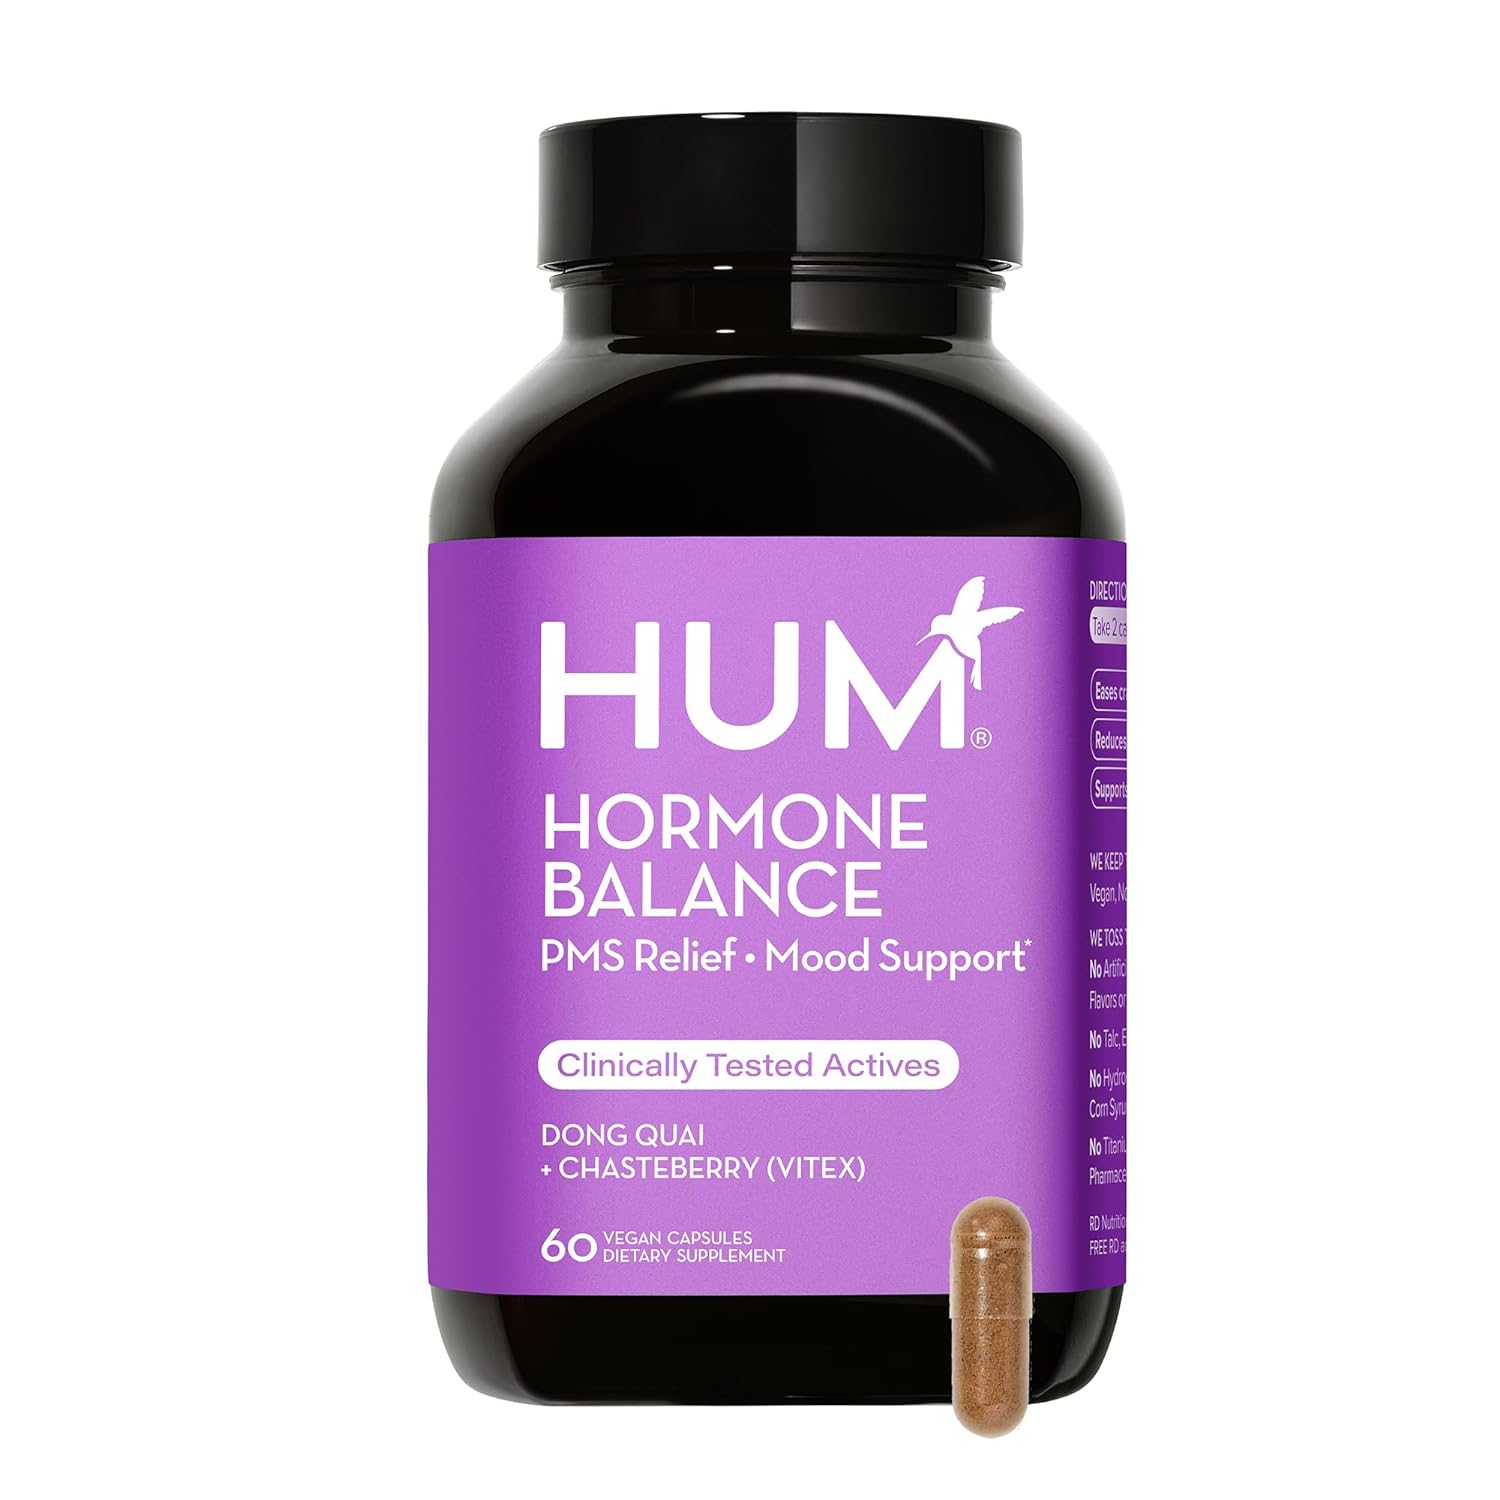 HUM Hormone Balance - Supplement for Women's Health - Support for Cramps, Cravings, Irritability & Hormonal Balance - Chasteberry & Dong Quai Women's Monthly Support (60 Vegan Capsules)